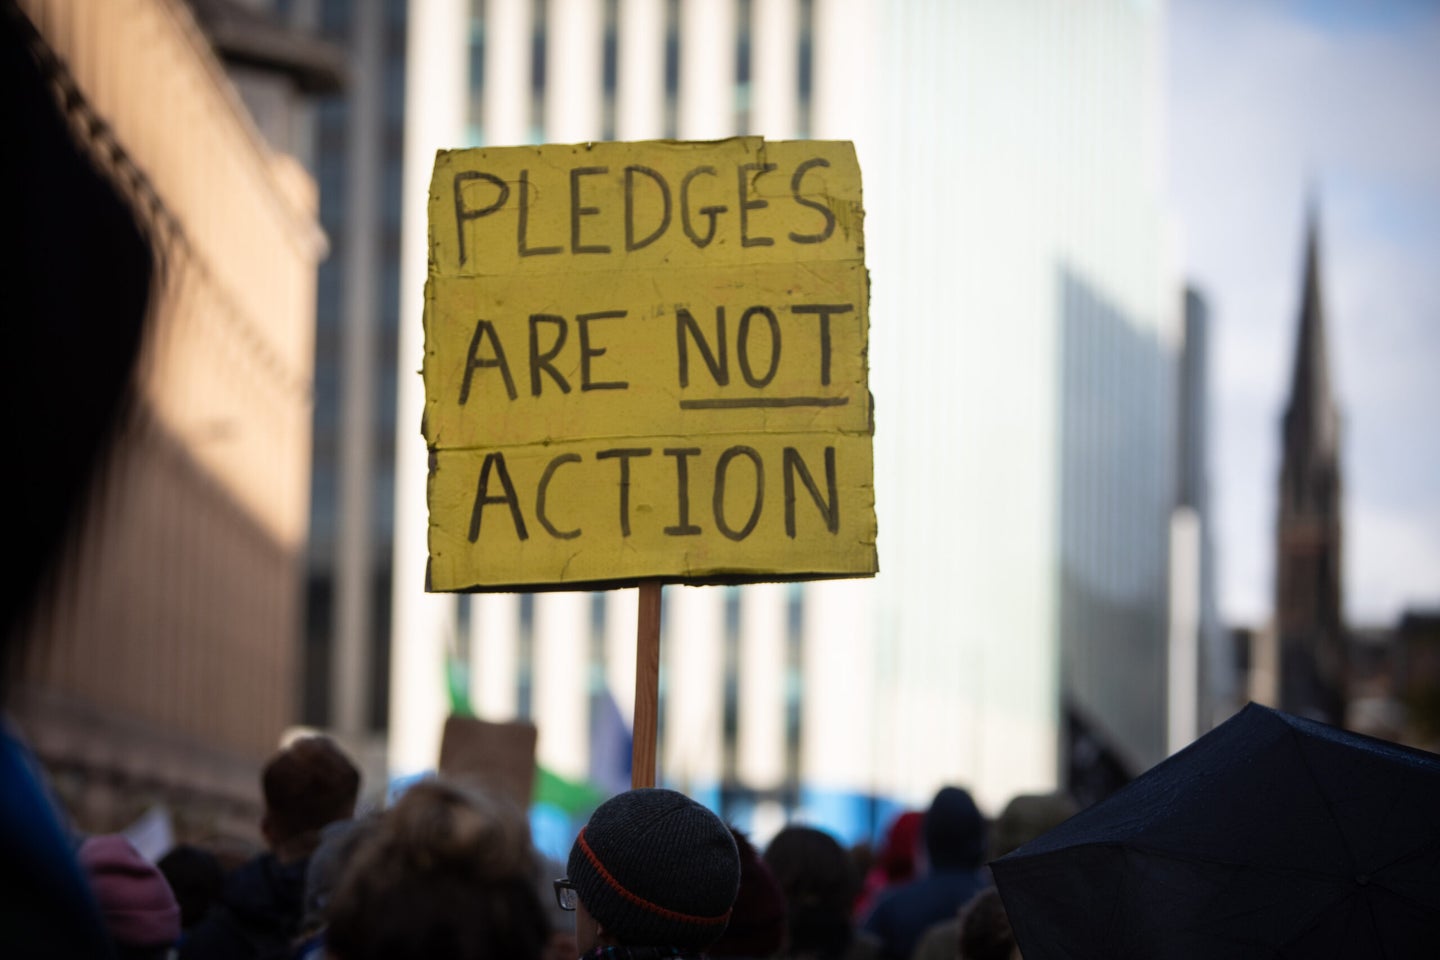 Protester in Glasgow, Scotland, at COP26 holding a "pledges are not action" climate change sign